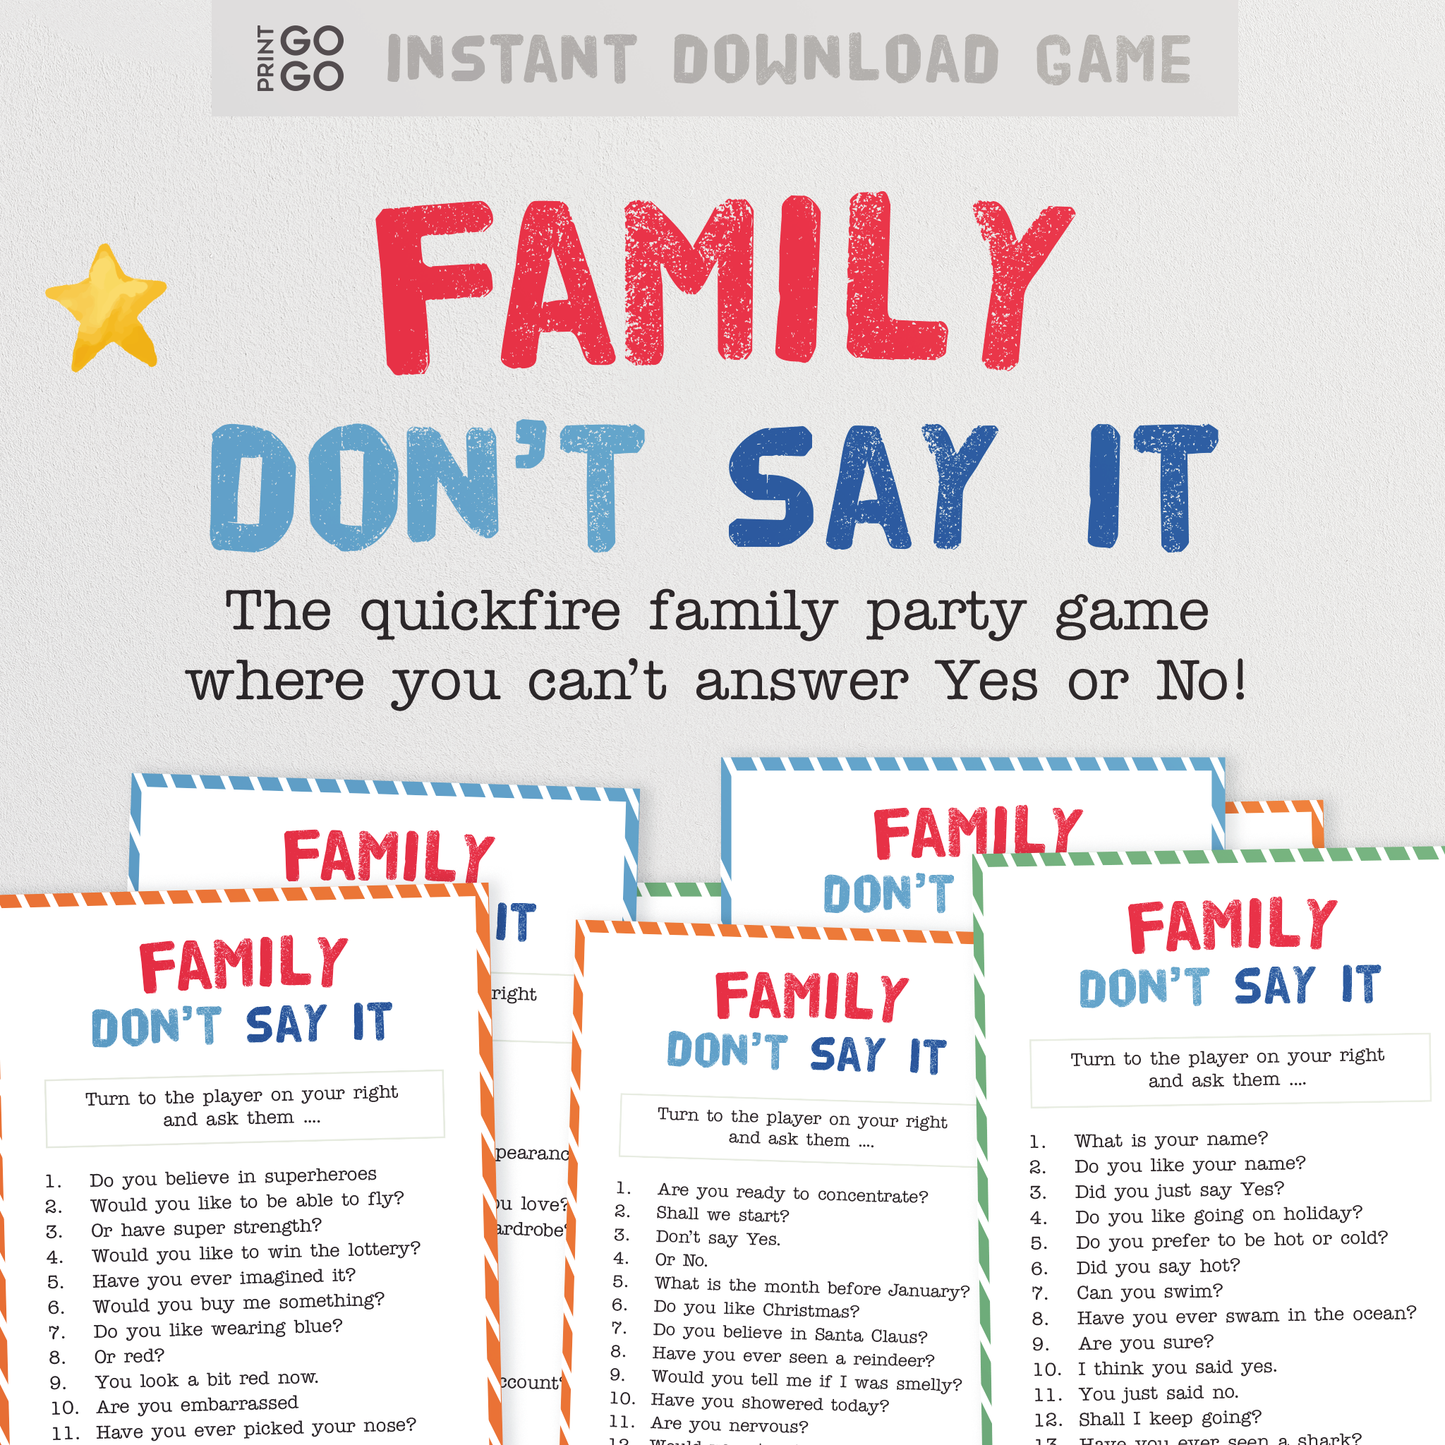 Family Don't Say It - The Quick Fire Family Party Game Where You Can't Answer Yes or No